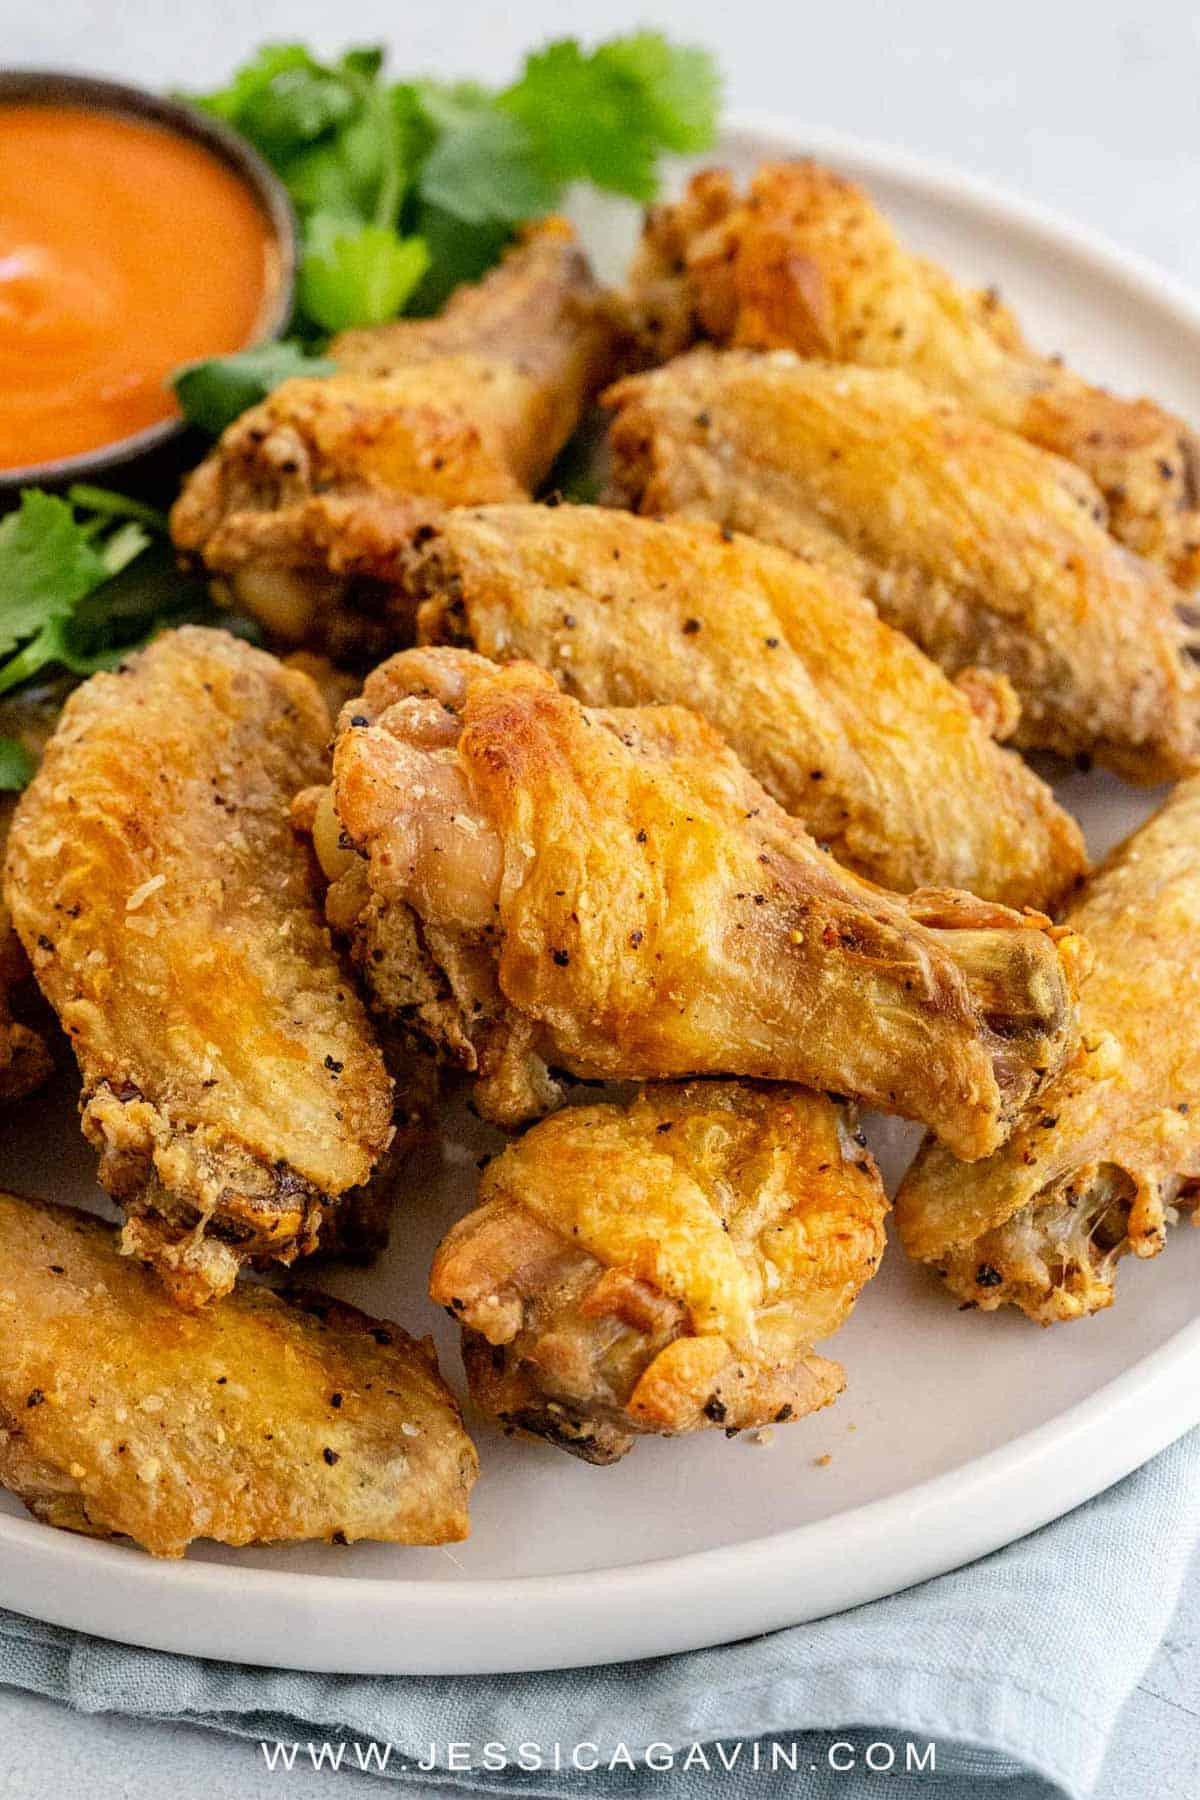 15 Recipes for Great Chicken Wings Baking Powder